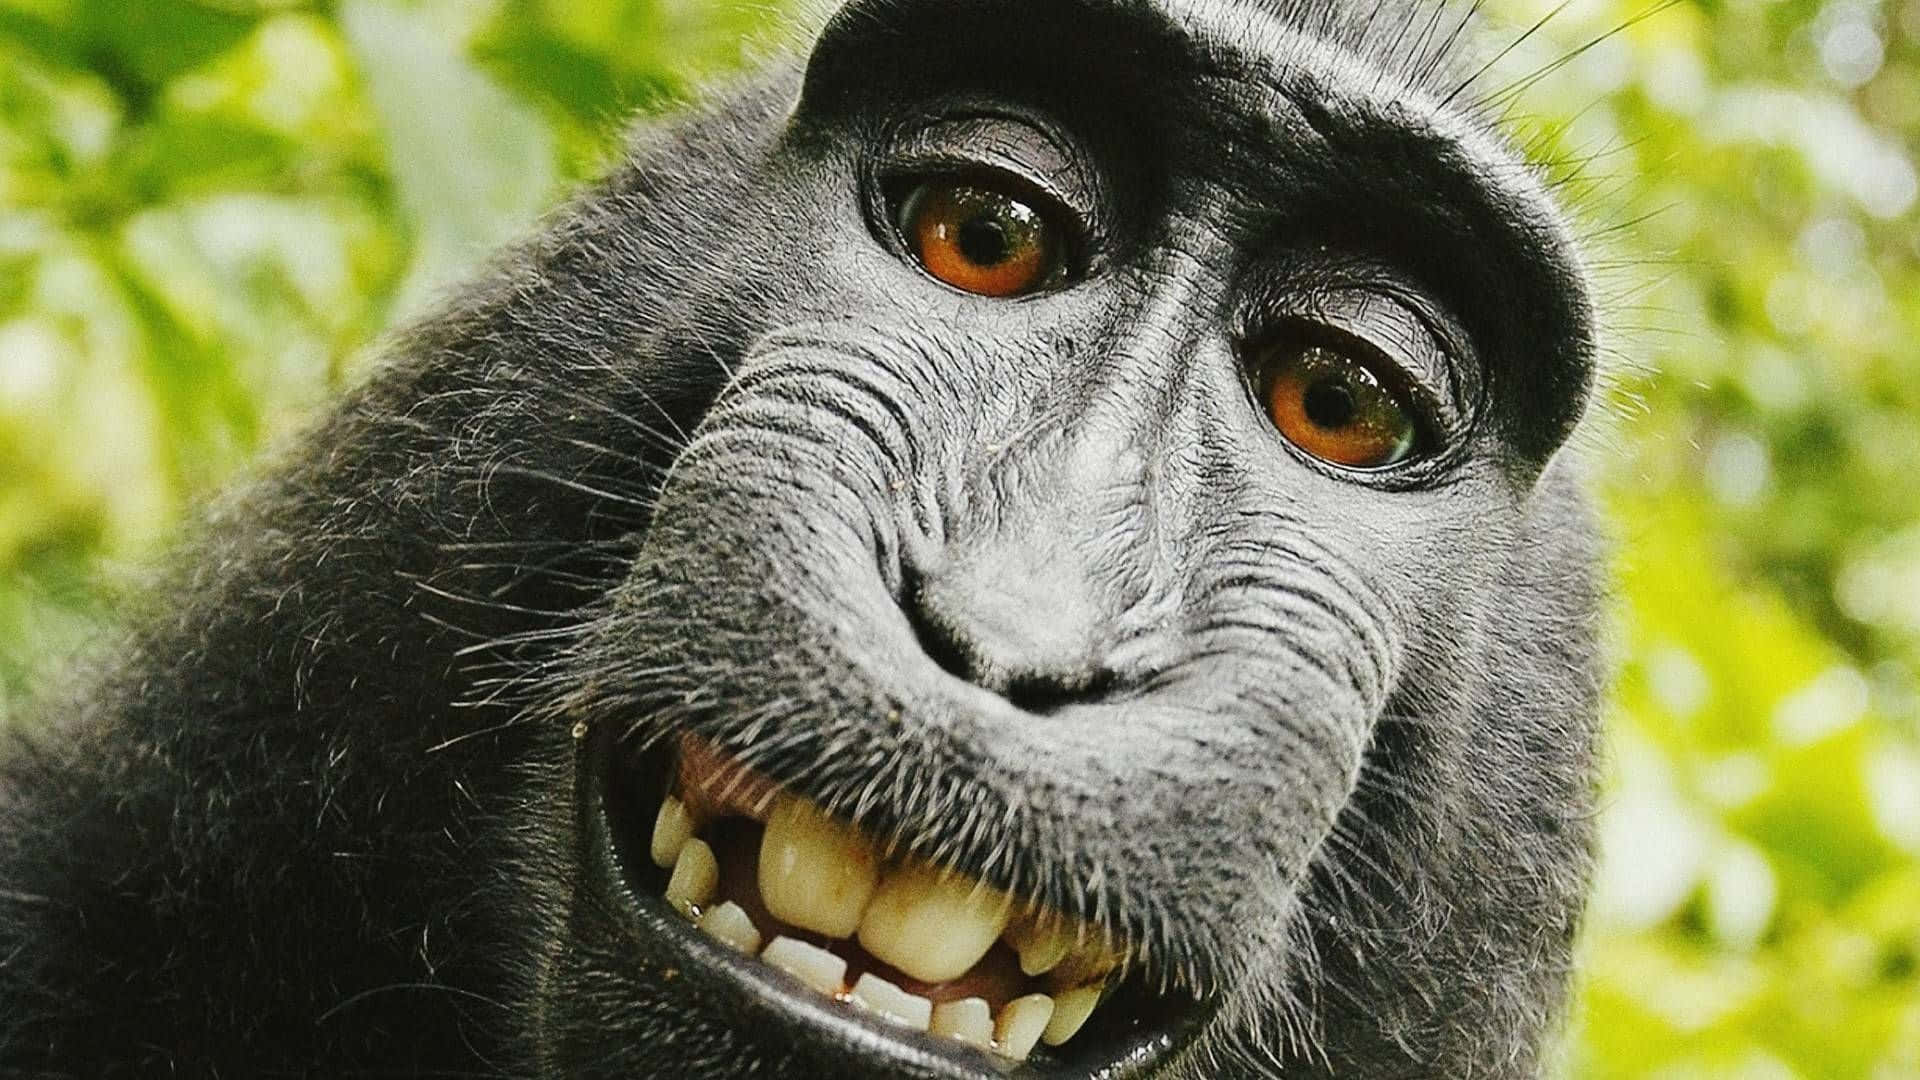 A Monkey Is Smiling And Looking At The Camera